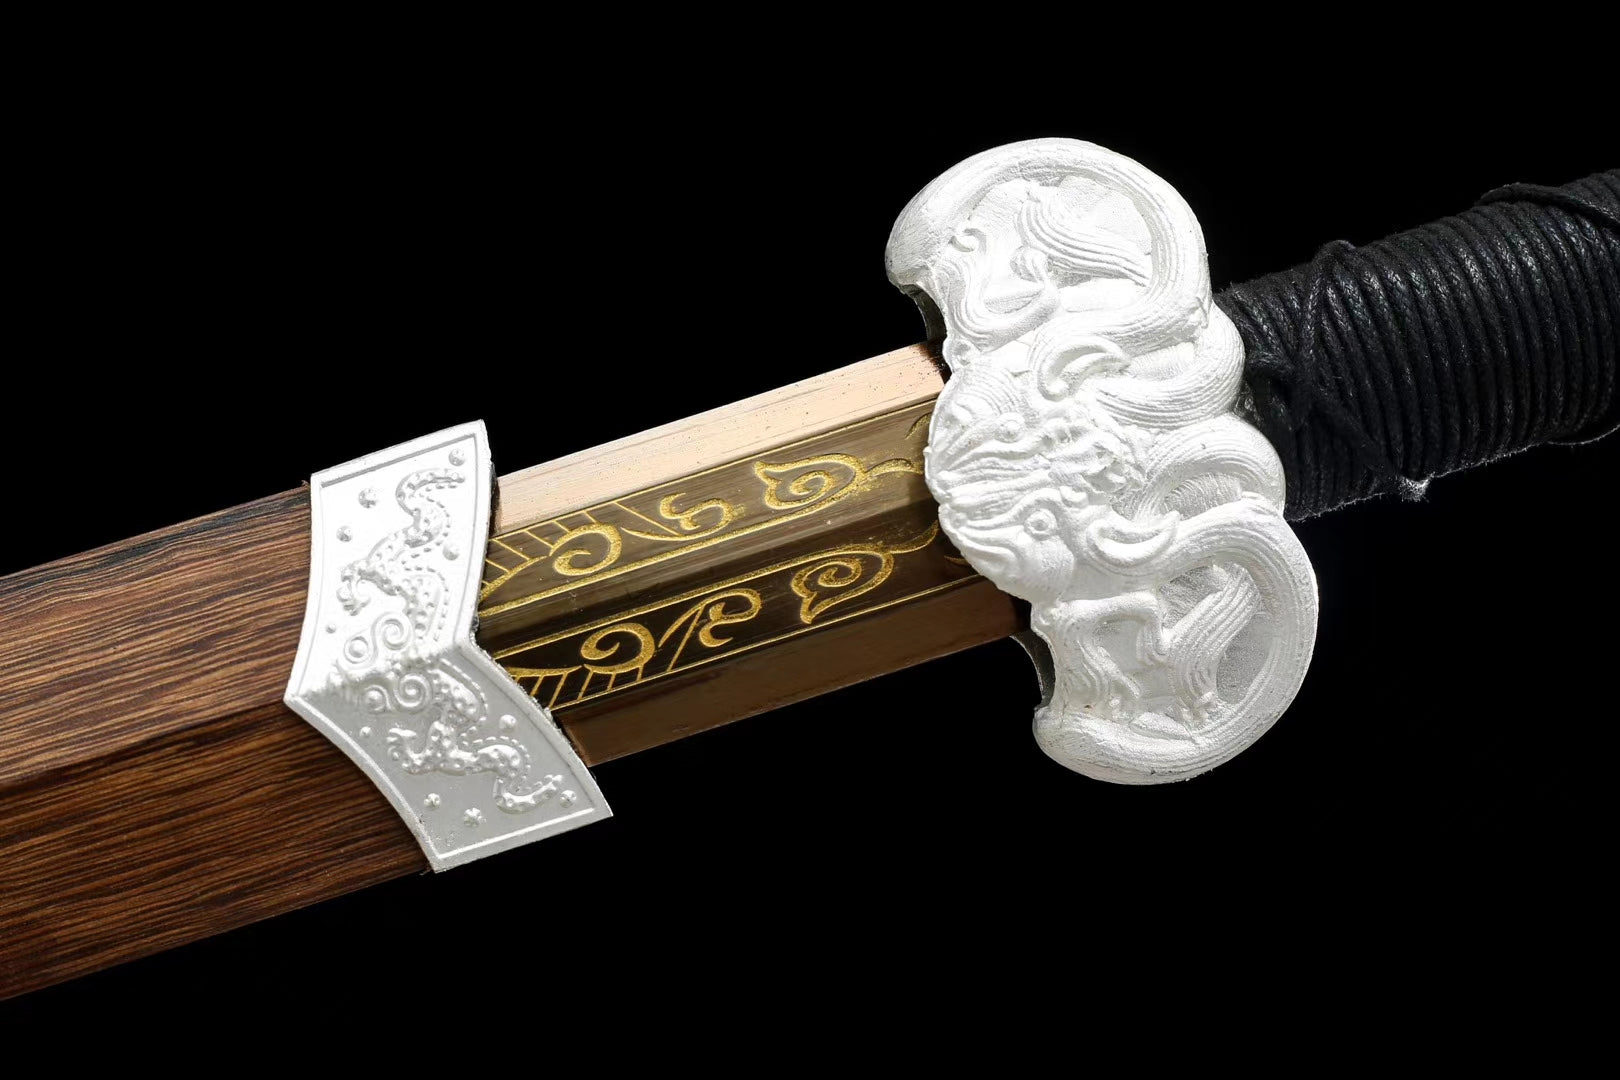 Tian gang sword,High carbon steel blade,Alloy fittings - Chinese sword shop